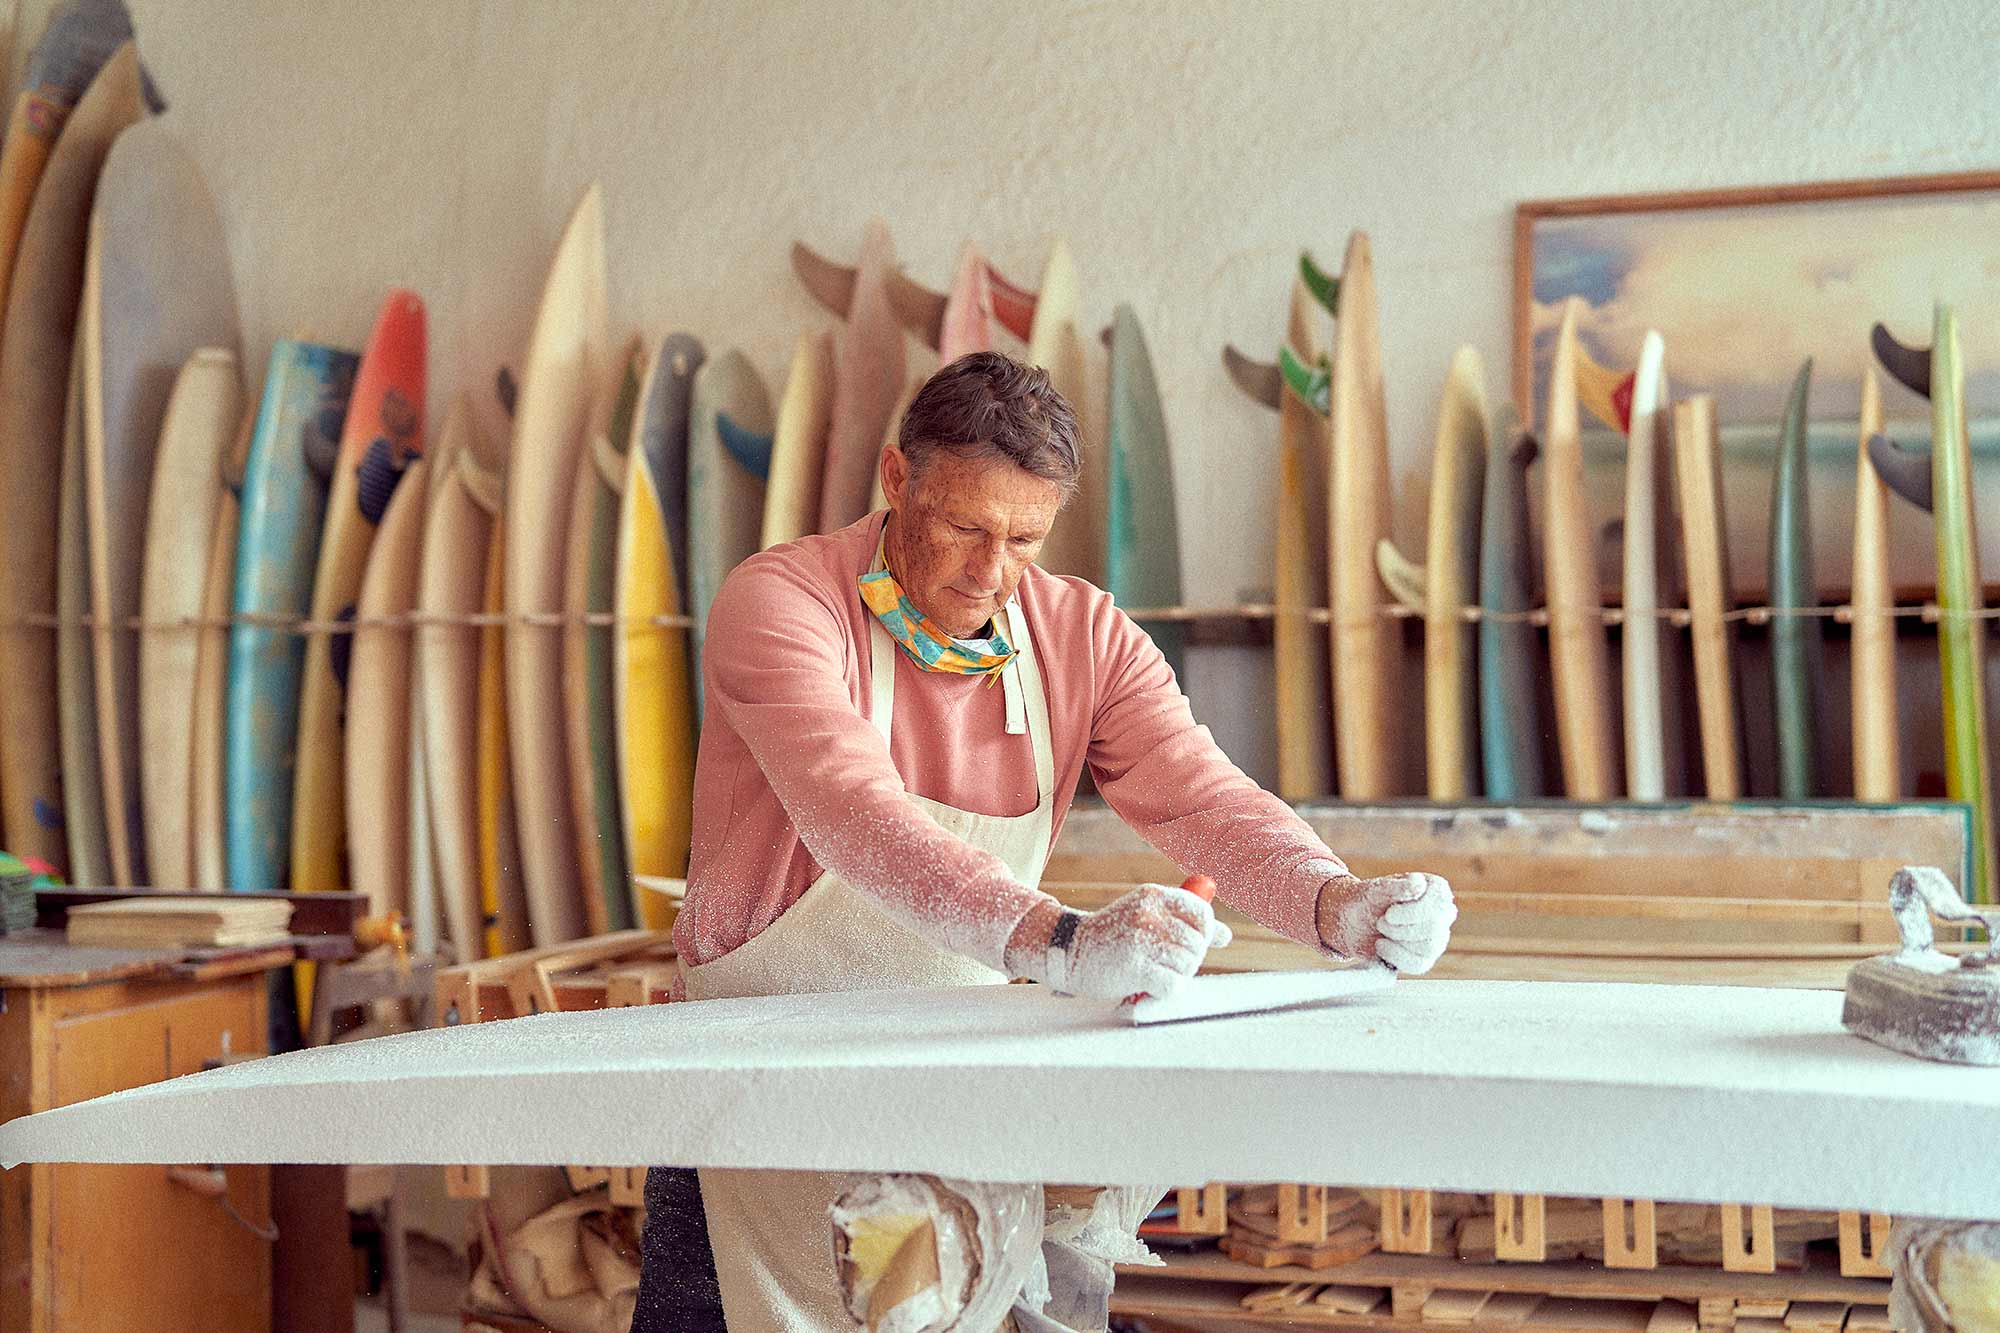 Lifestyle photoshoot featuring WAWA, a surfboard shaping company. The image captures the essence of the lifestyle associated with WAWA, showcasing the craftsmanship and passion for surfboard shaping. Surrounded by surfboards and tools, the photograph exudes a sense of creativity and adventure.